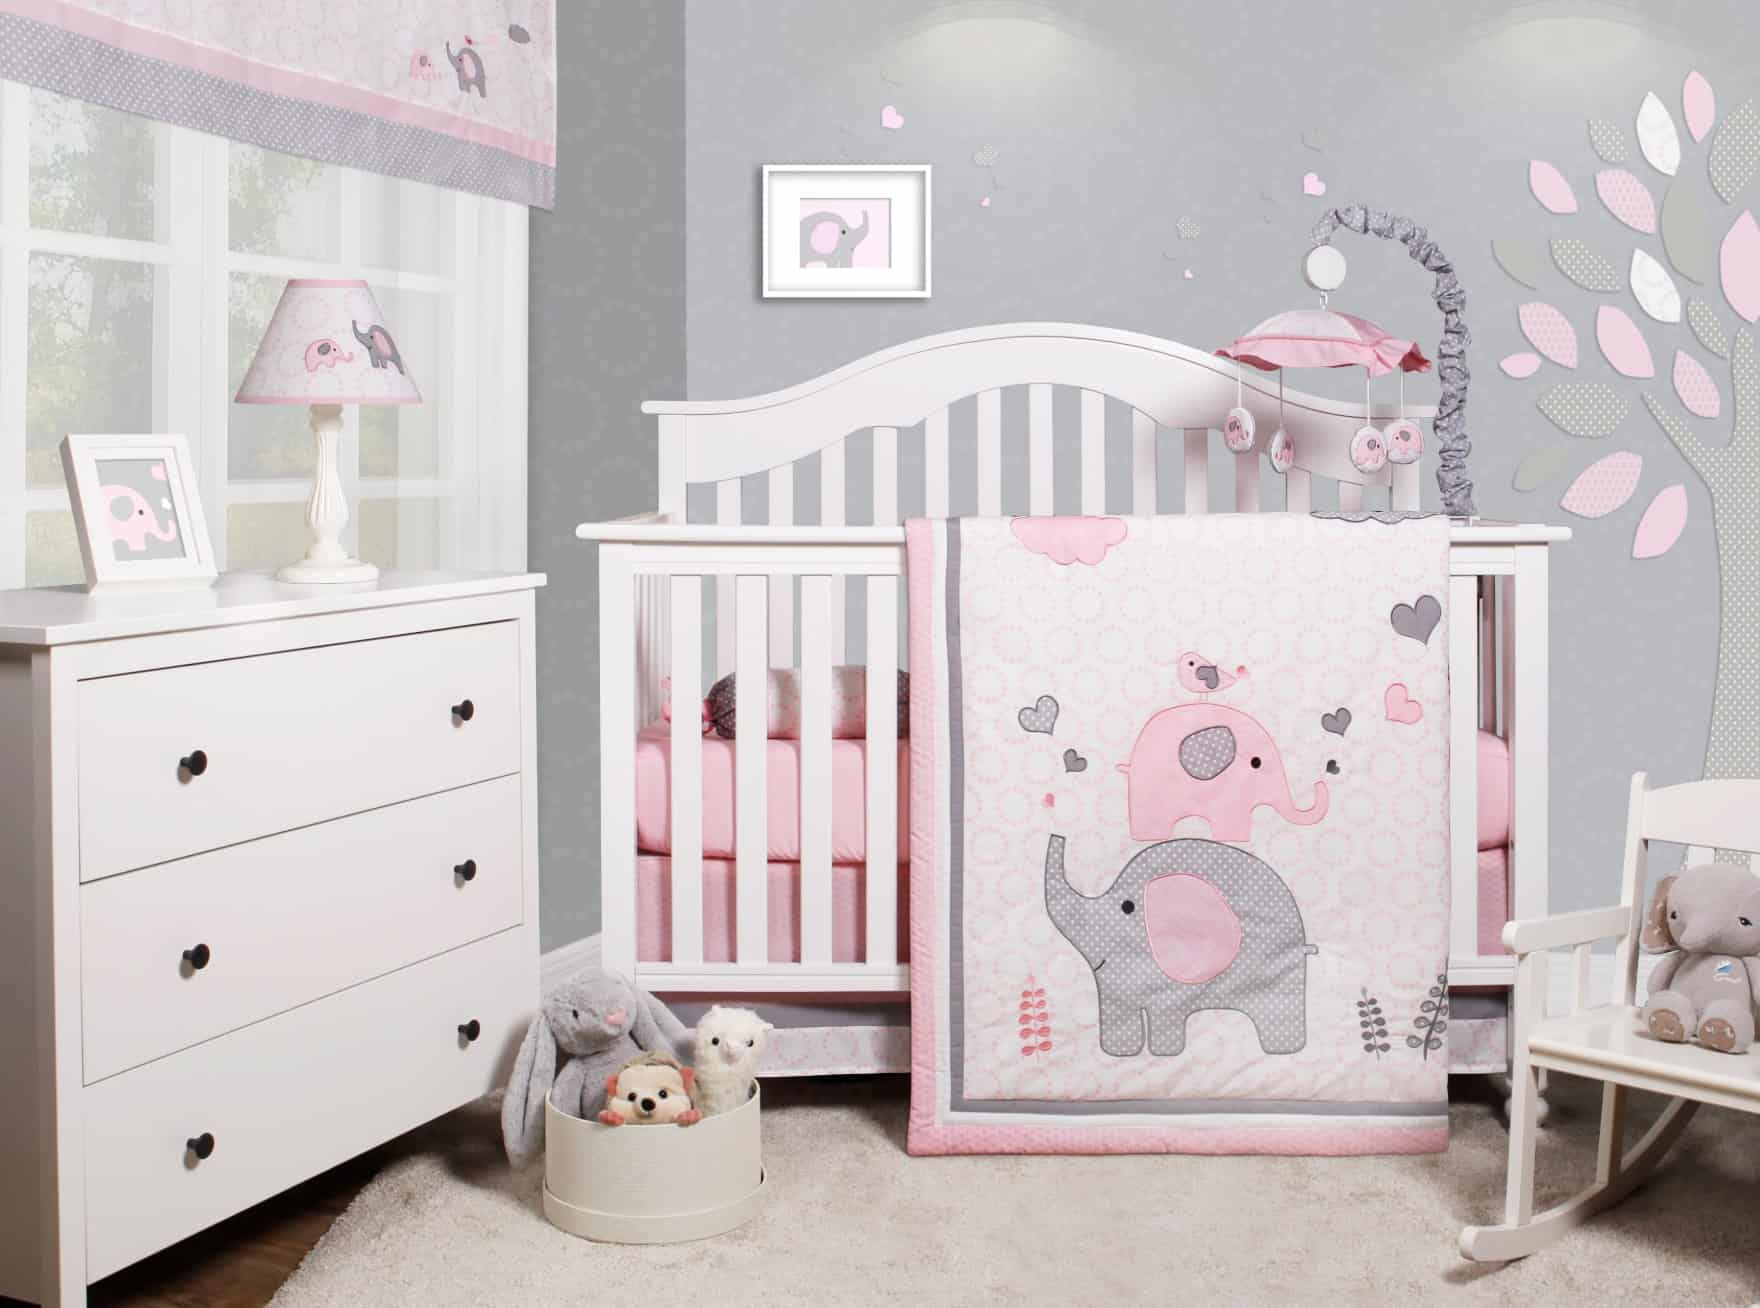 D.I.Y Baby Girl Room Decorations
 20 Cute Baby Girl Room Ideas